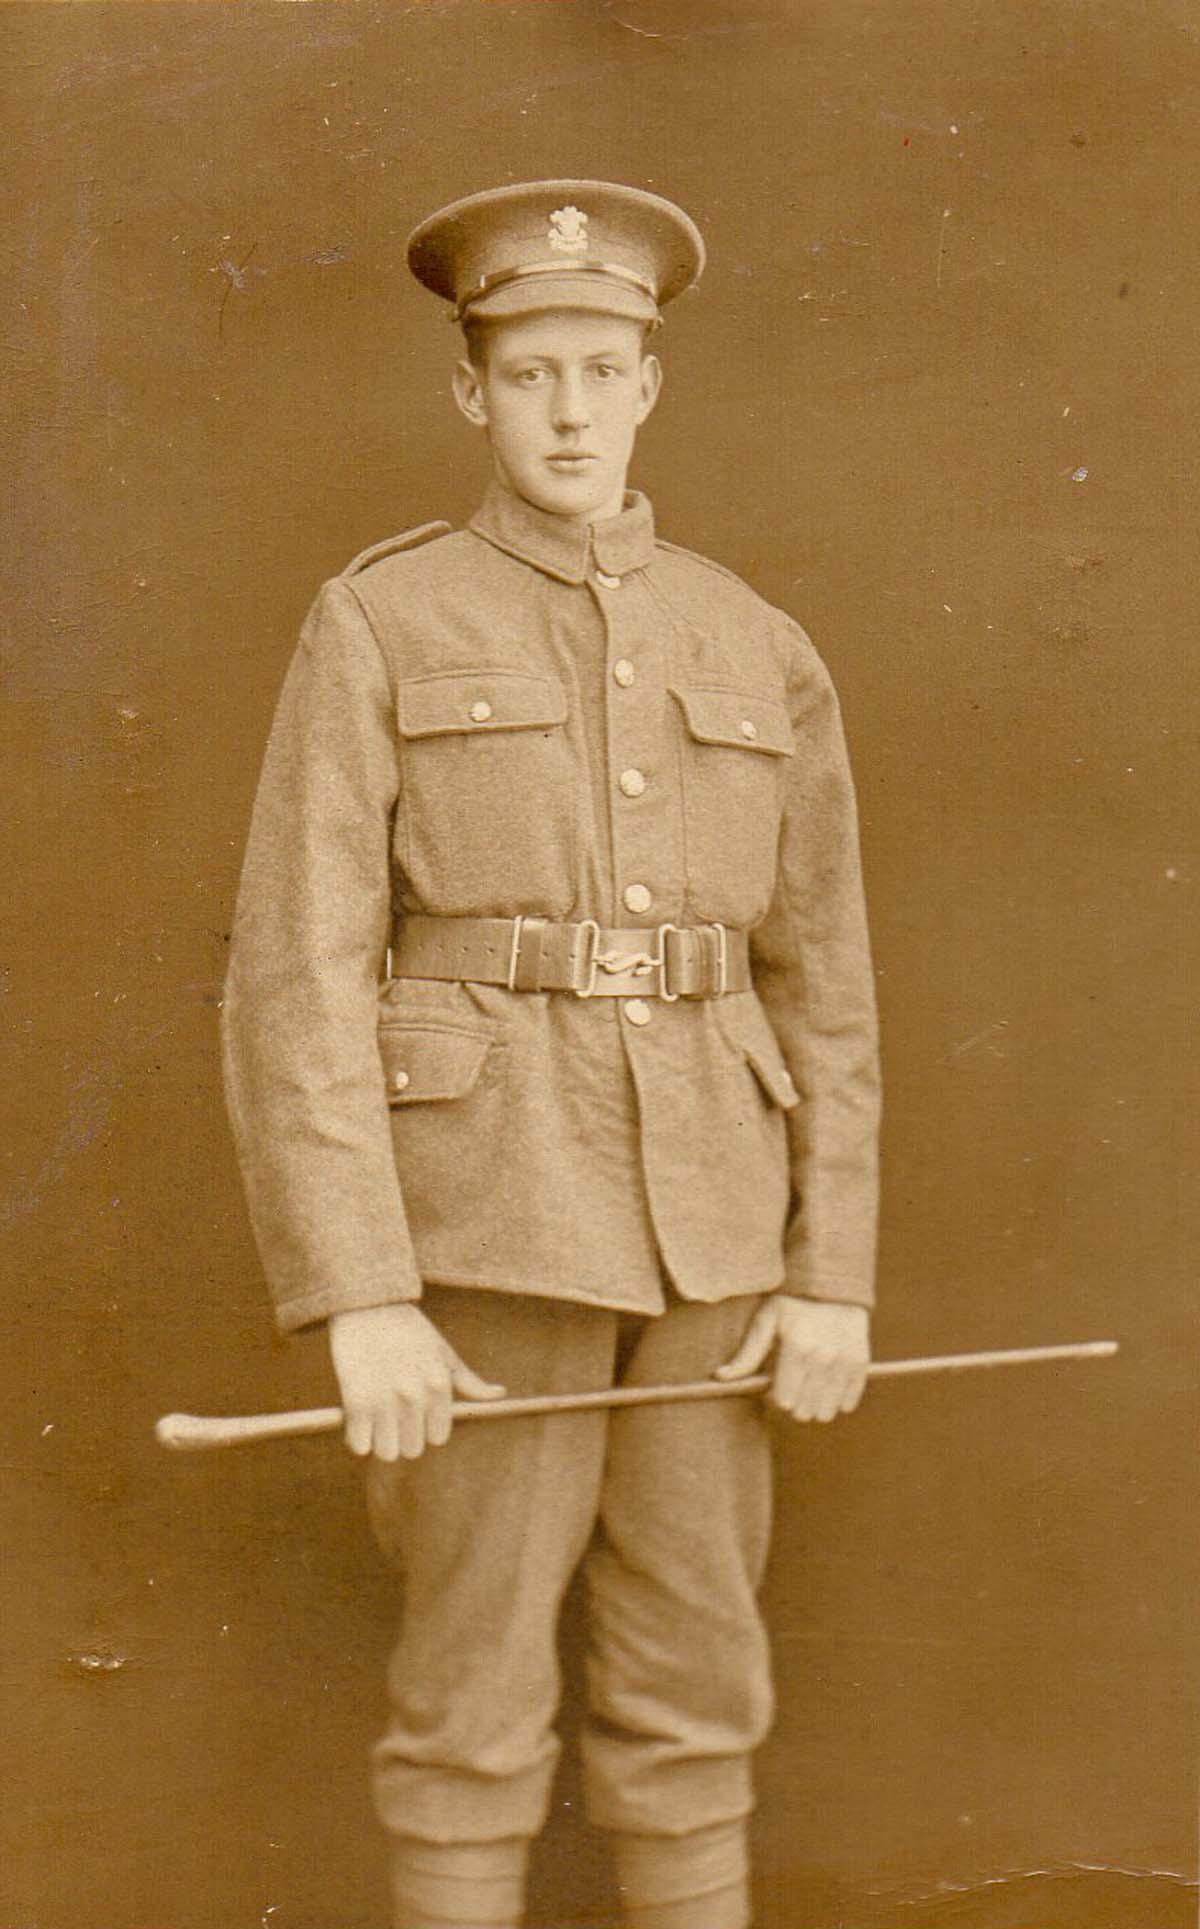 William Bland, the second son of a Grayrigg farmer, fought with the Shropshire Light Infantry. He survived the war.